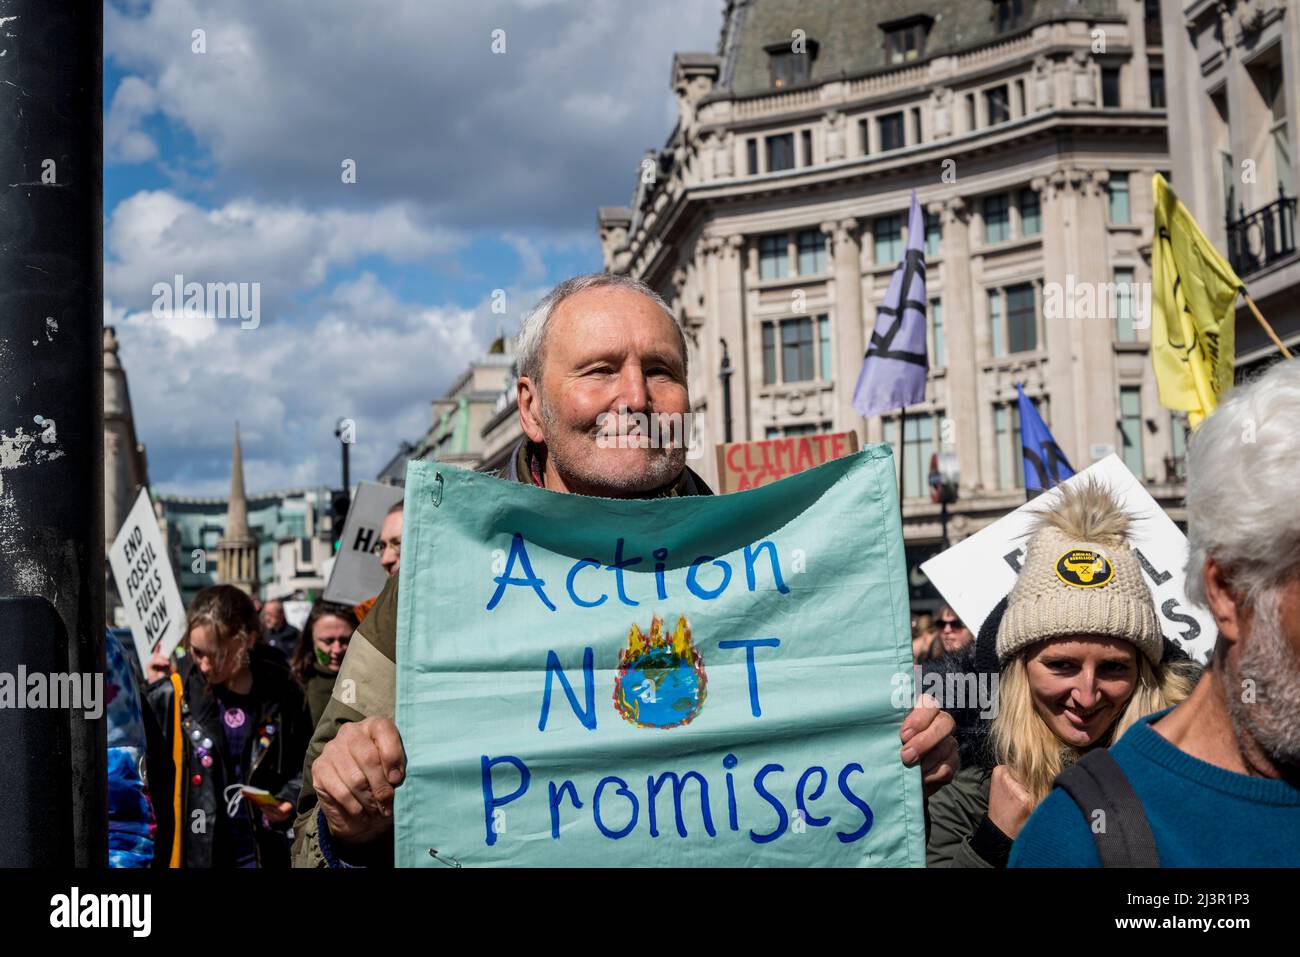 Action Not promises placard, We Will Not Be Bystanders, an Extinction Rebellion protest that fights for climate justice, in central London, 09.04.2022, London, England, UK Stock Photo